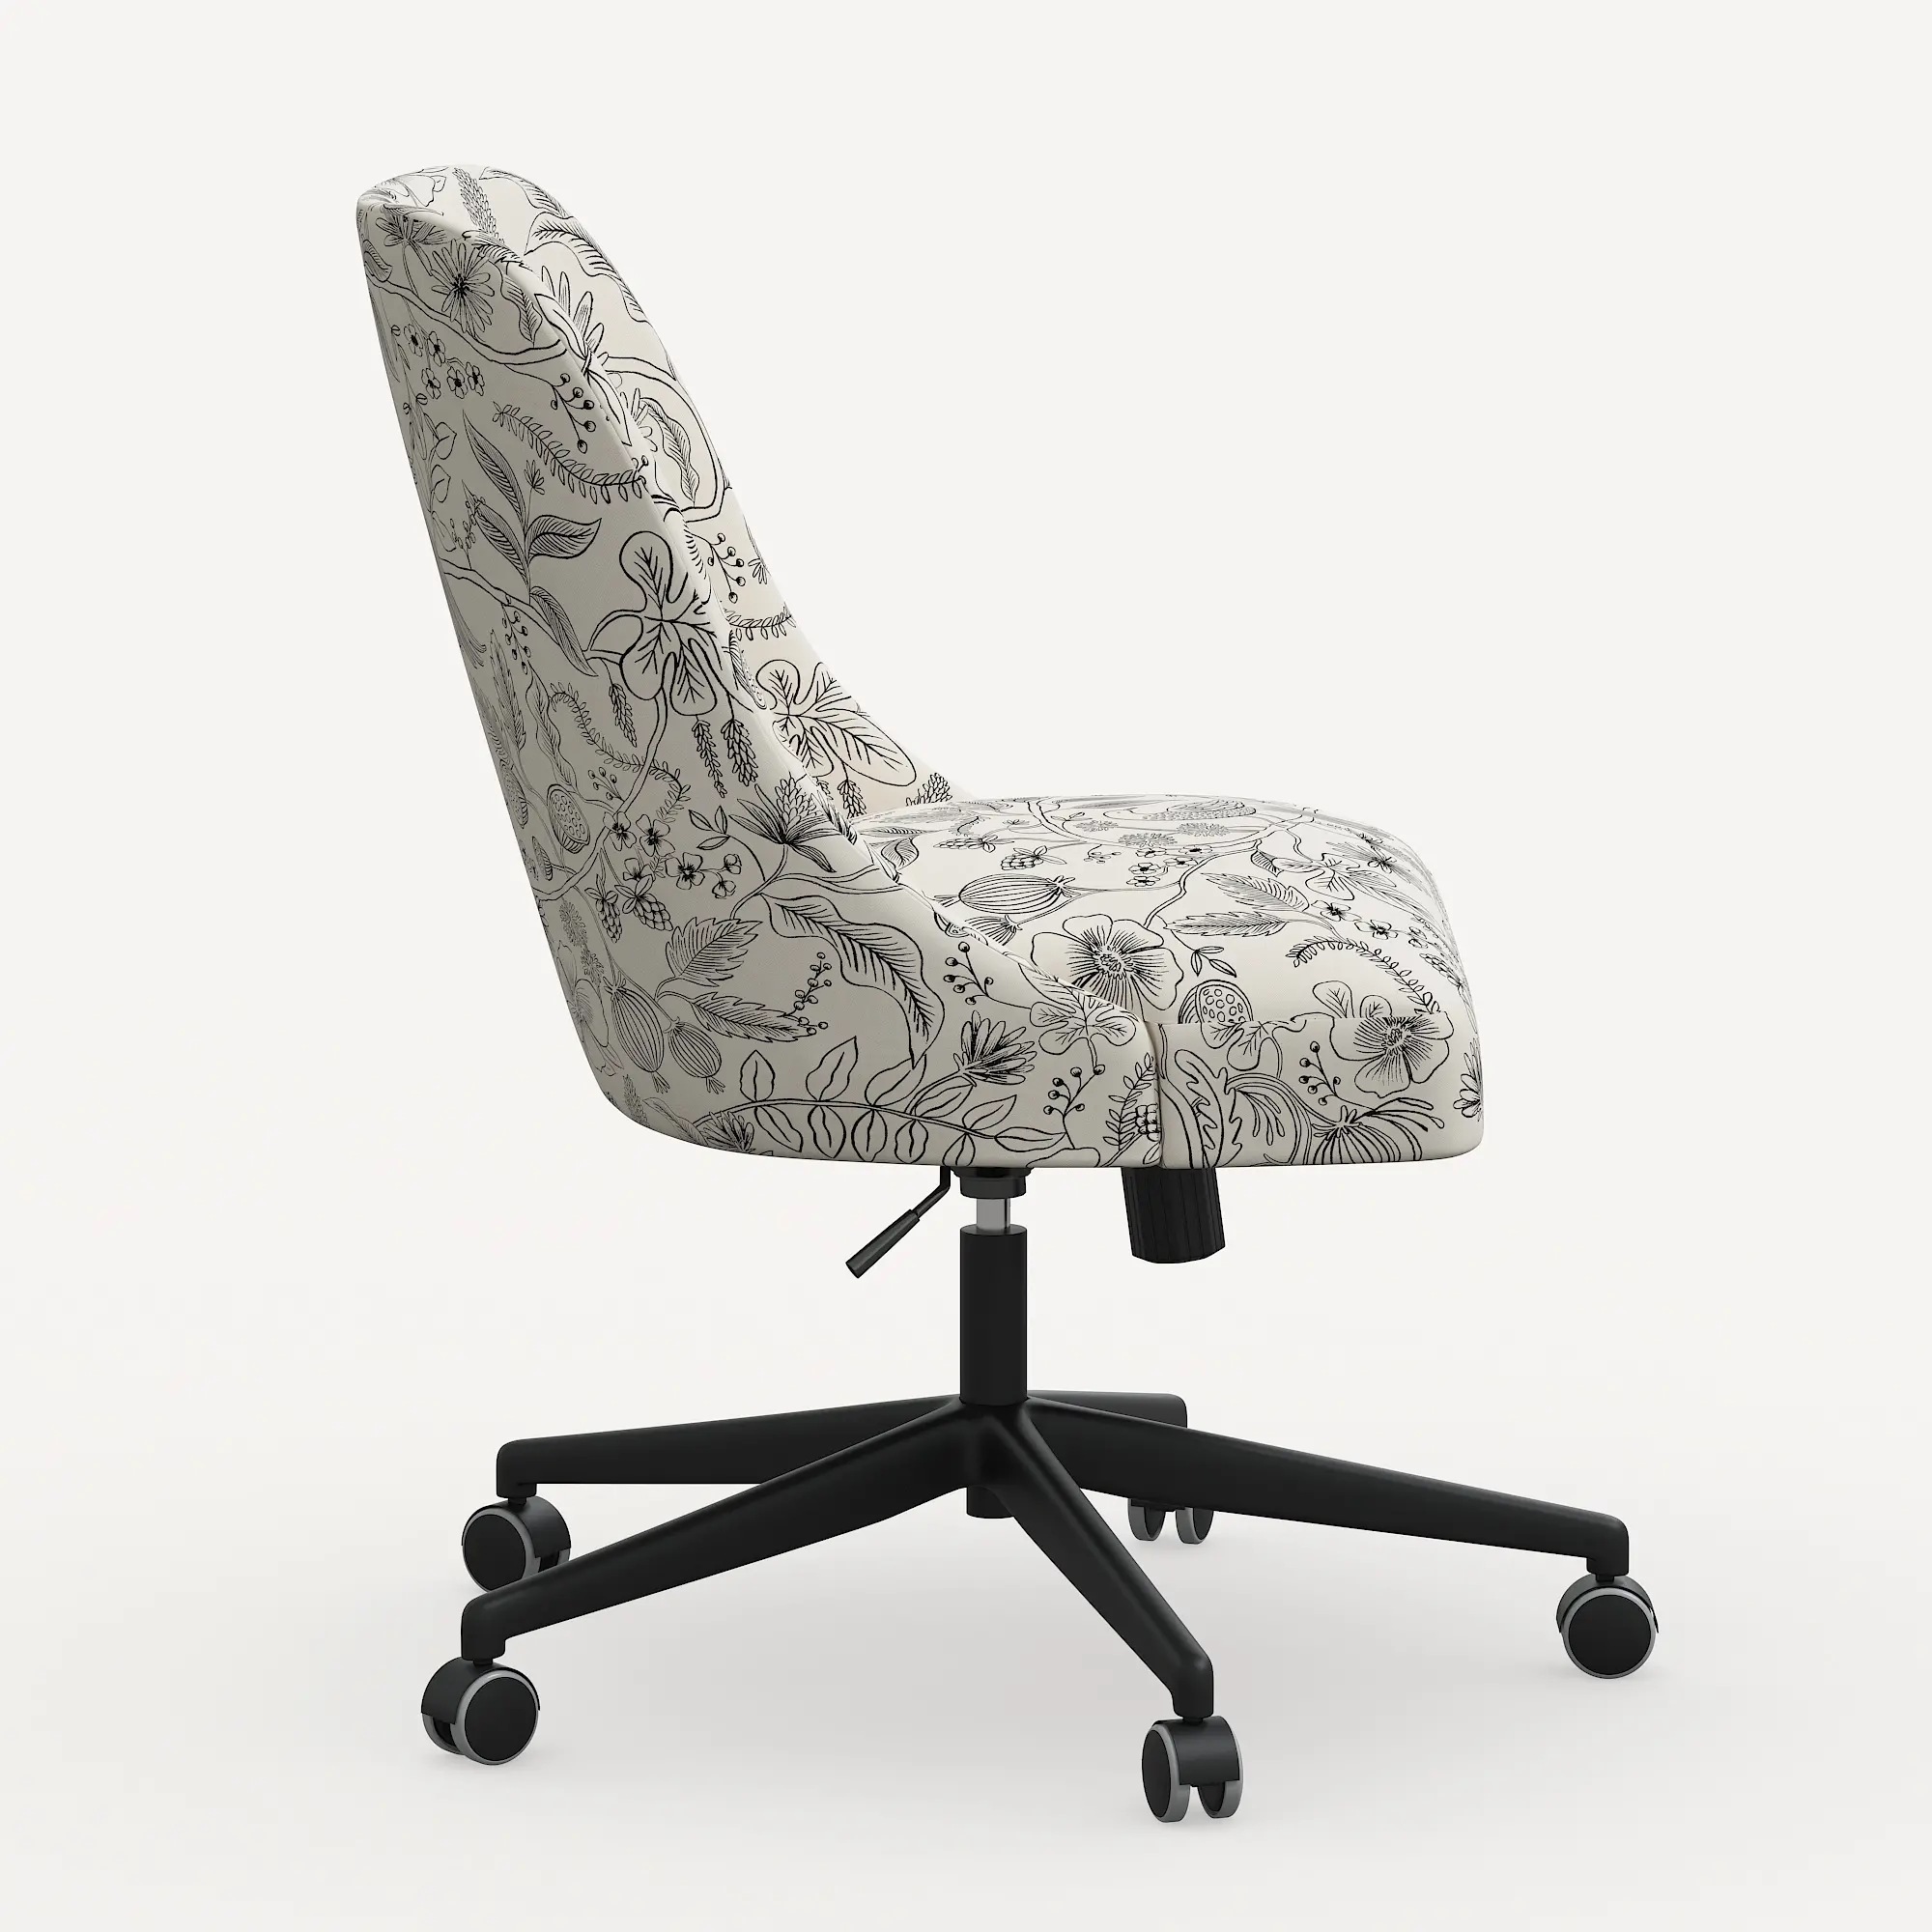 Rifle Paper Co. Oxford Aviary Cream & Black Office Chair